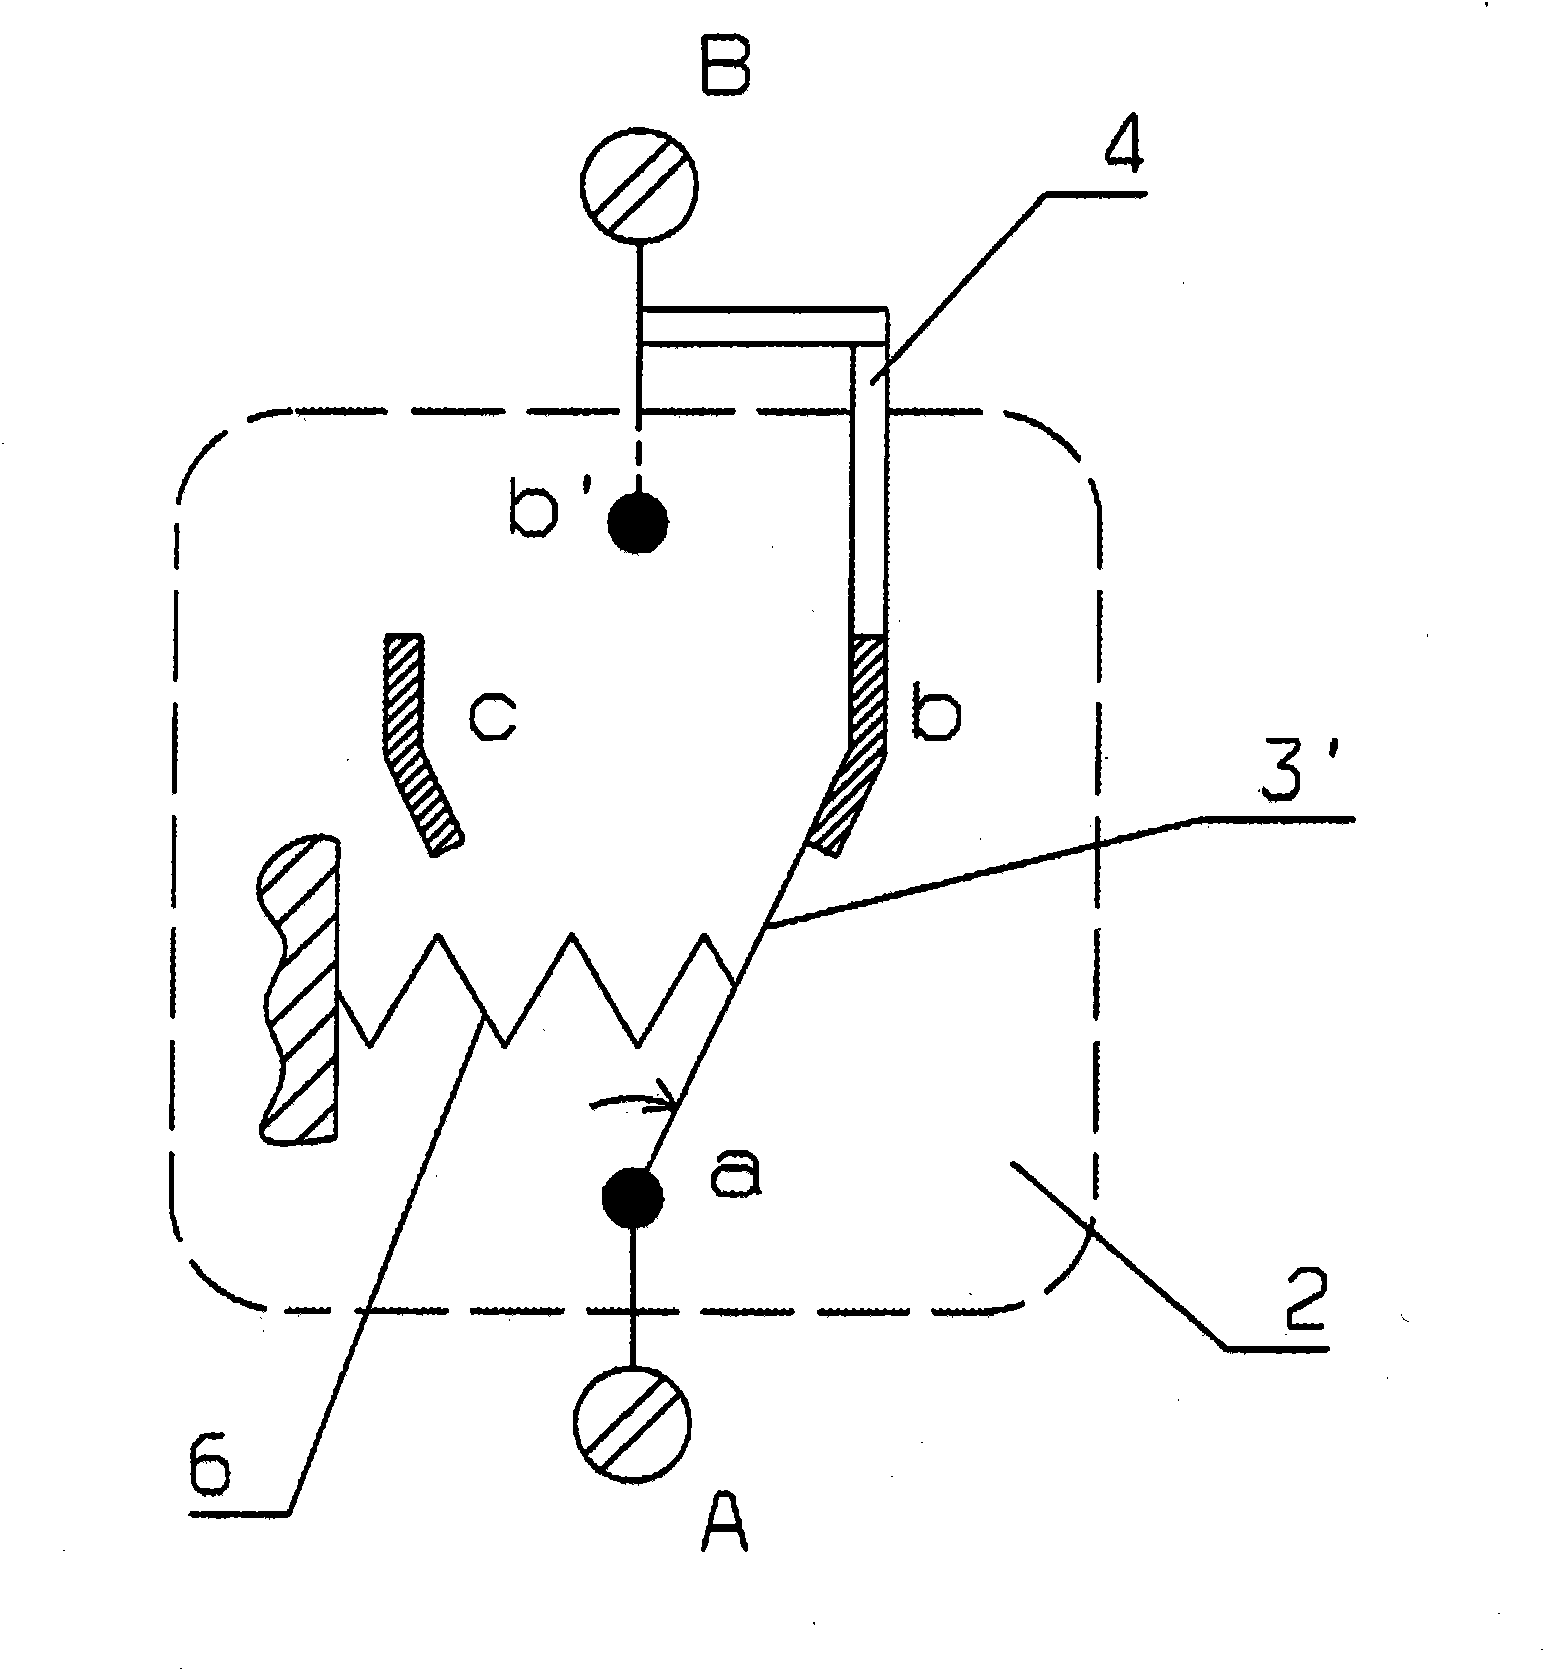 Surge arrester having a housing and having at least one arresting element